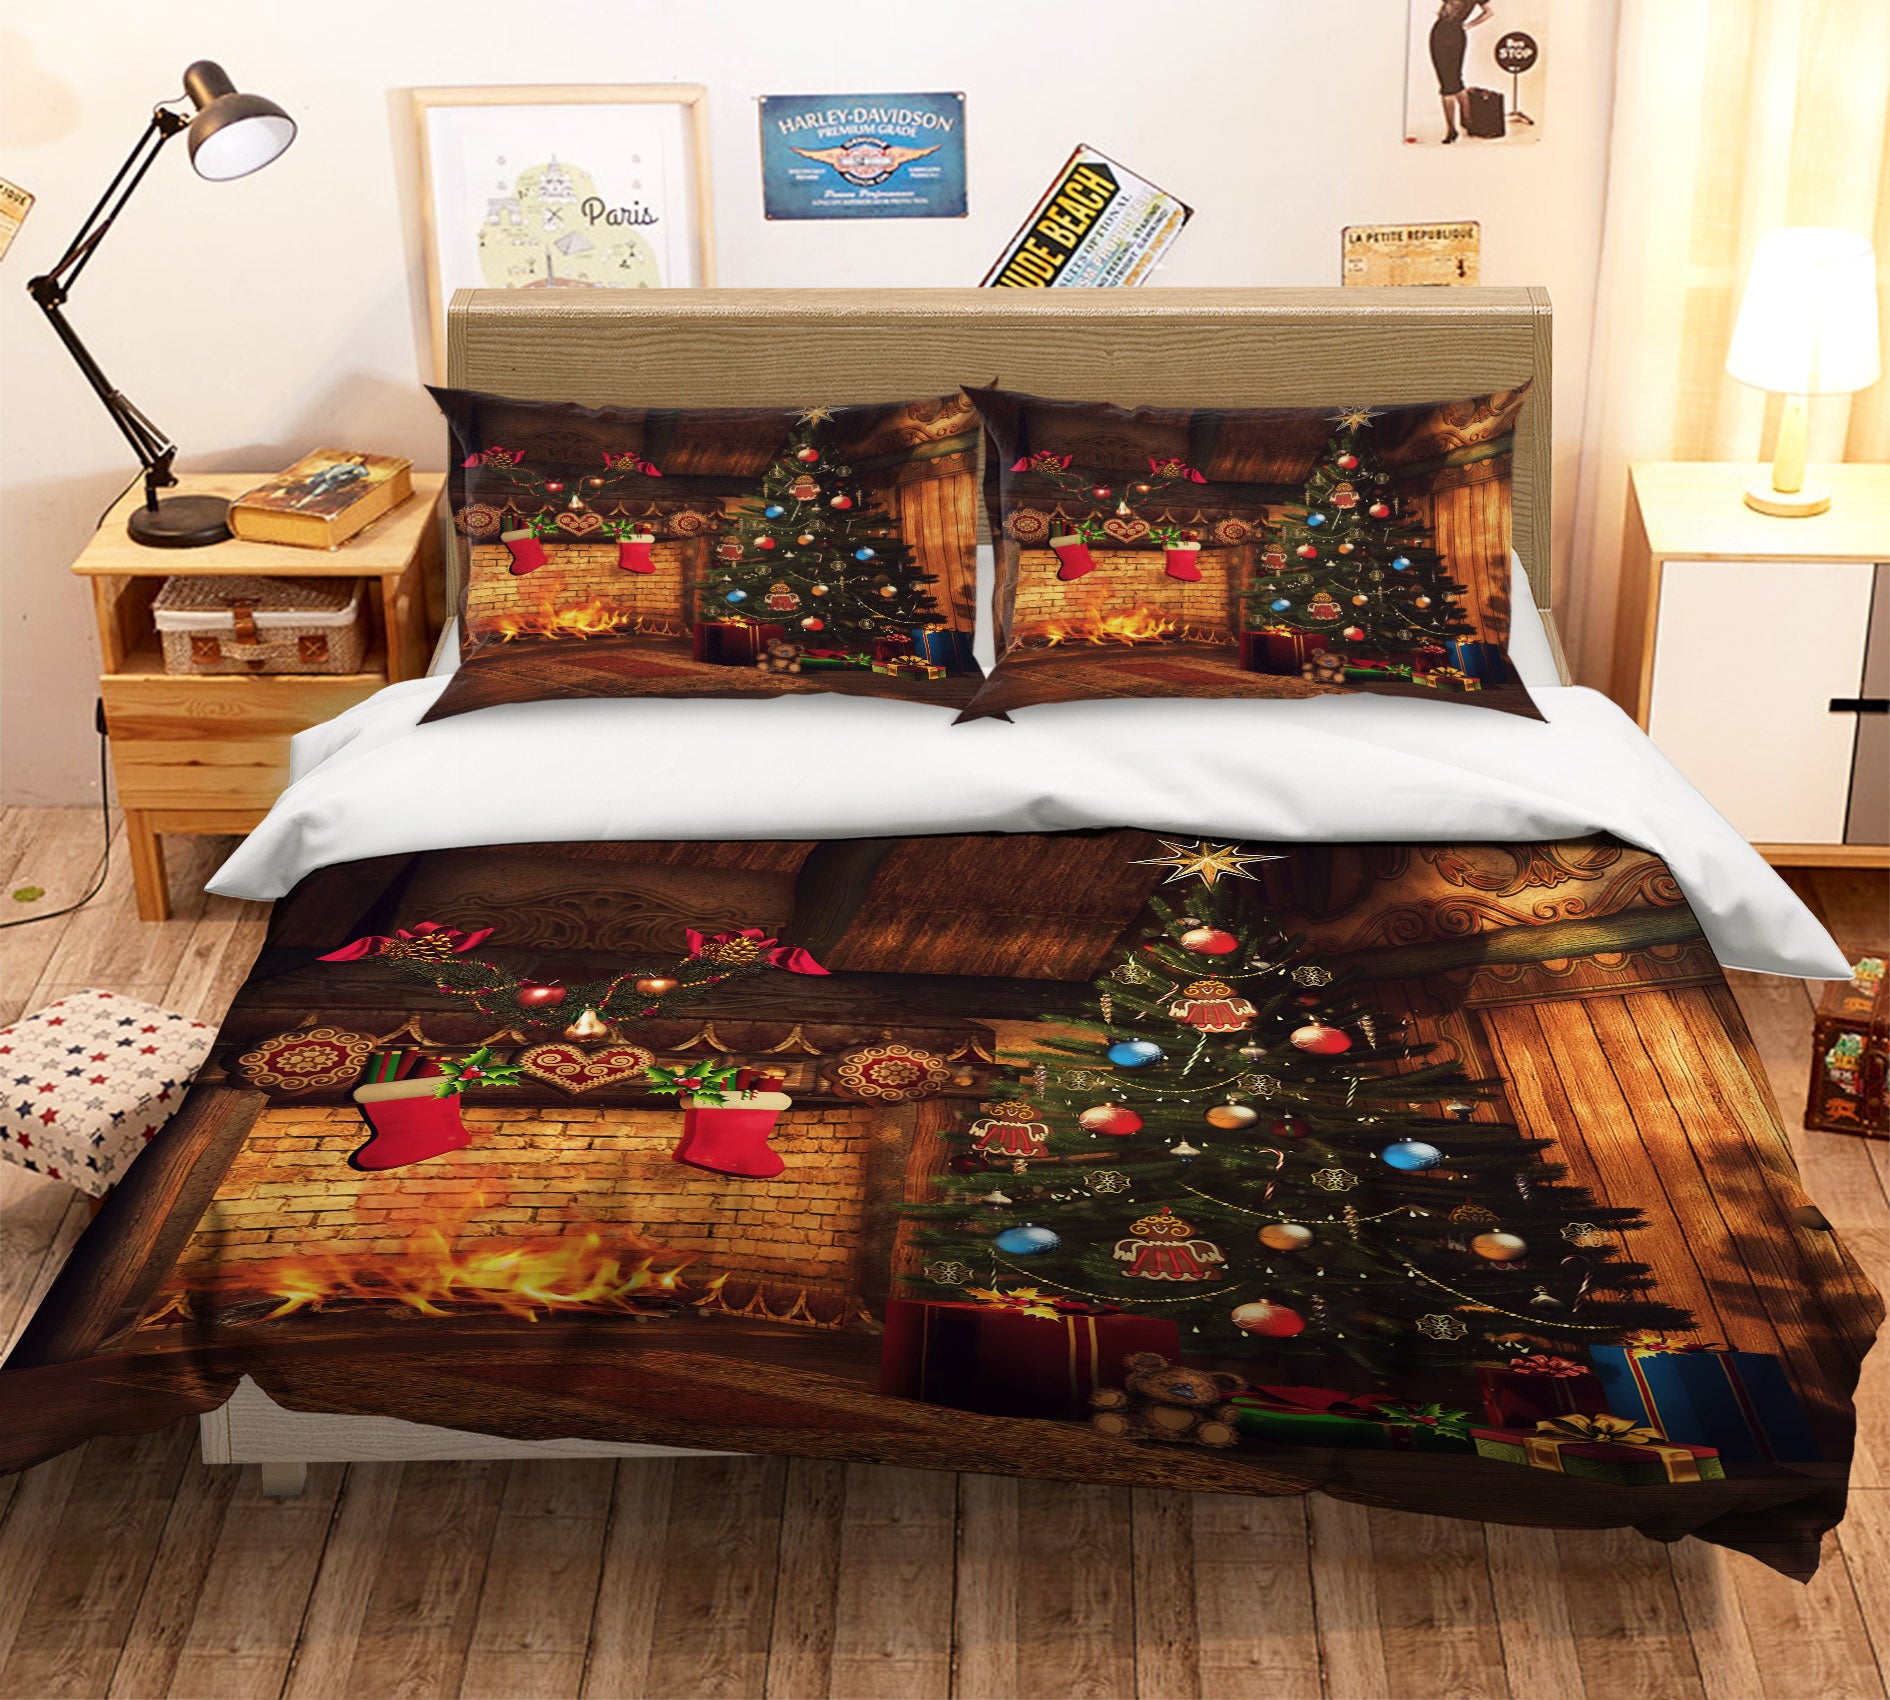 3D Fireplace Tree 52243 Christmas Quilt Duvet Cover Xmas Bed Pillowcases